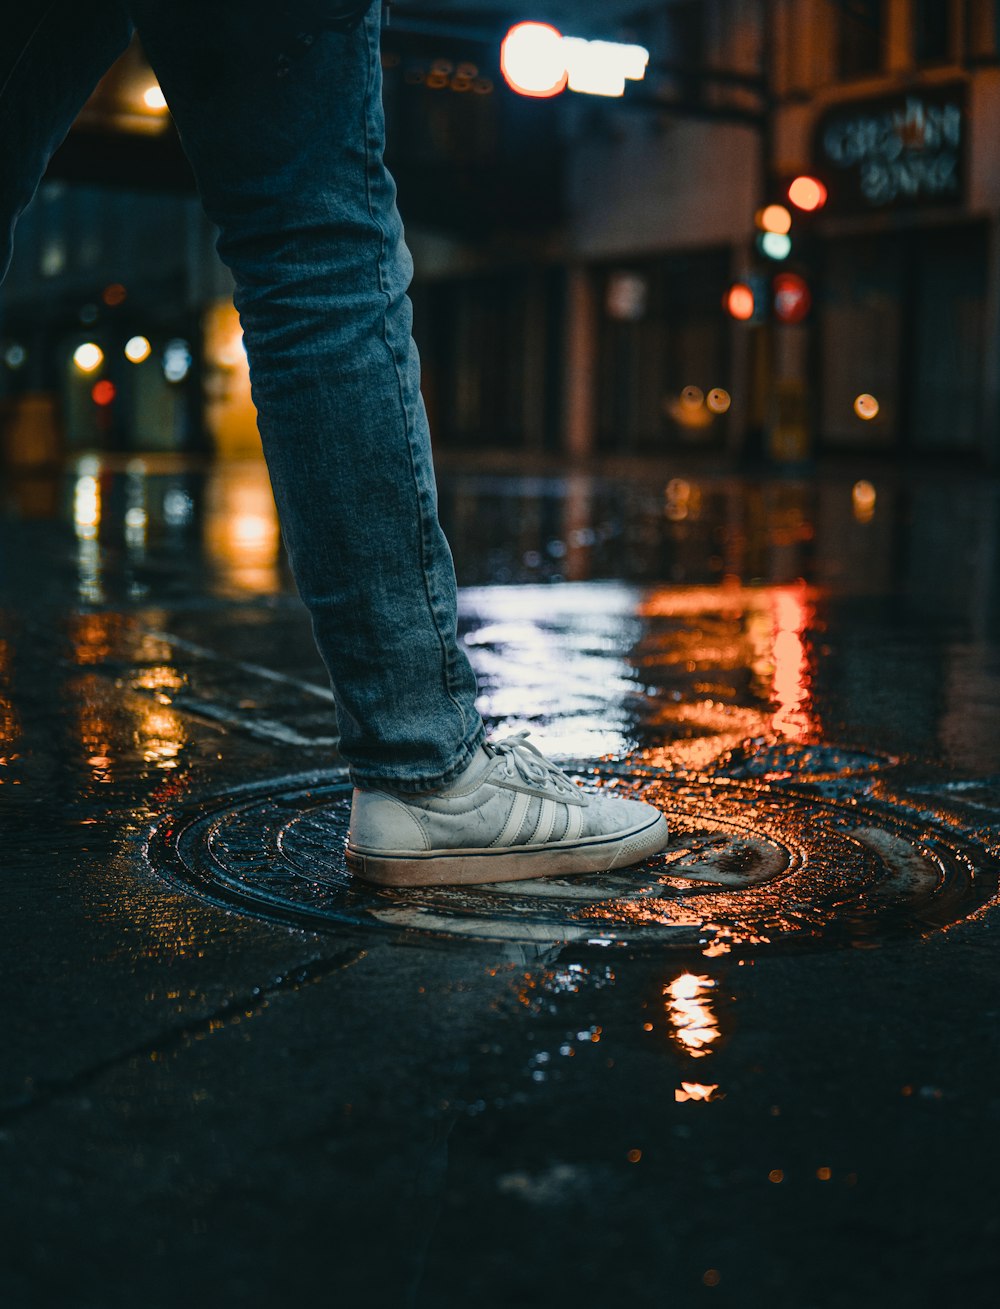 person in blue denim jeans and white sneakers standing on wet road during night time